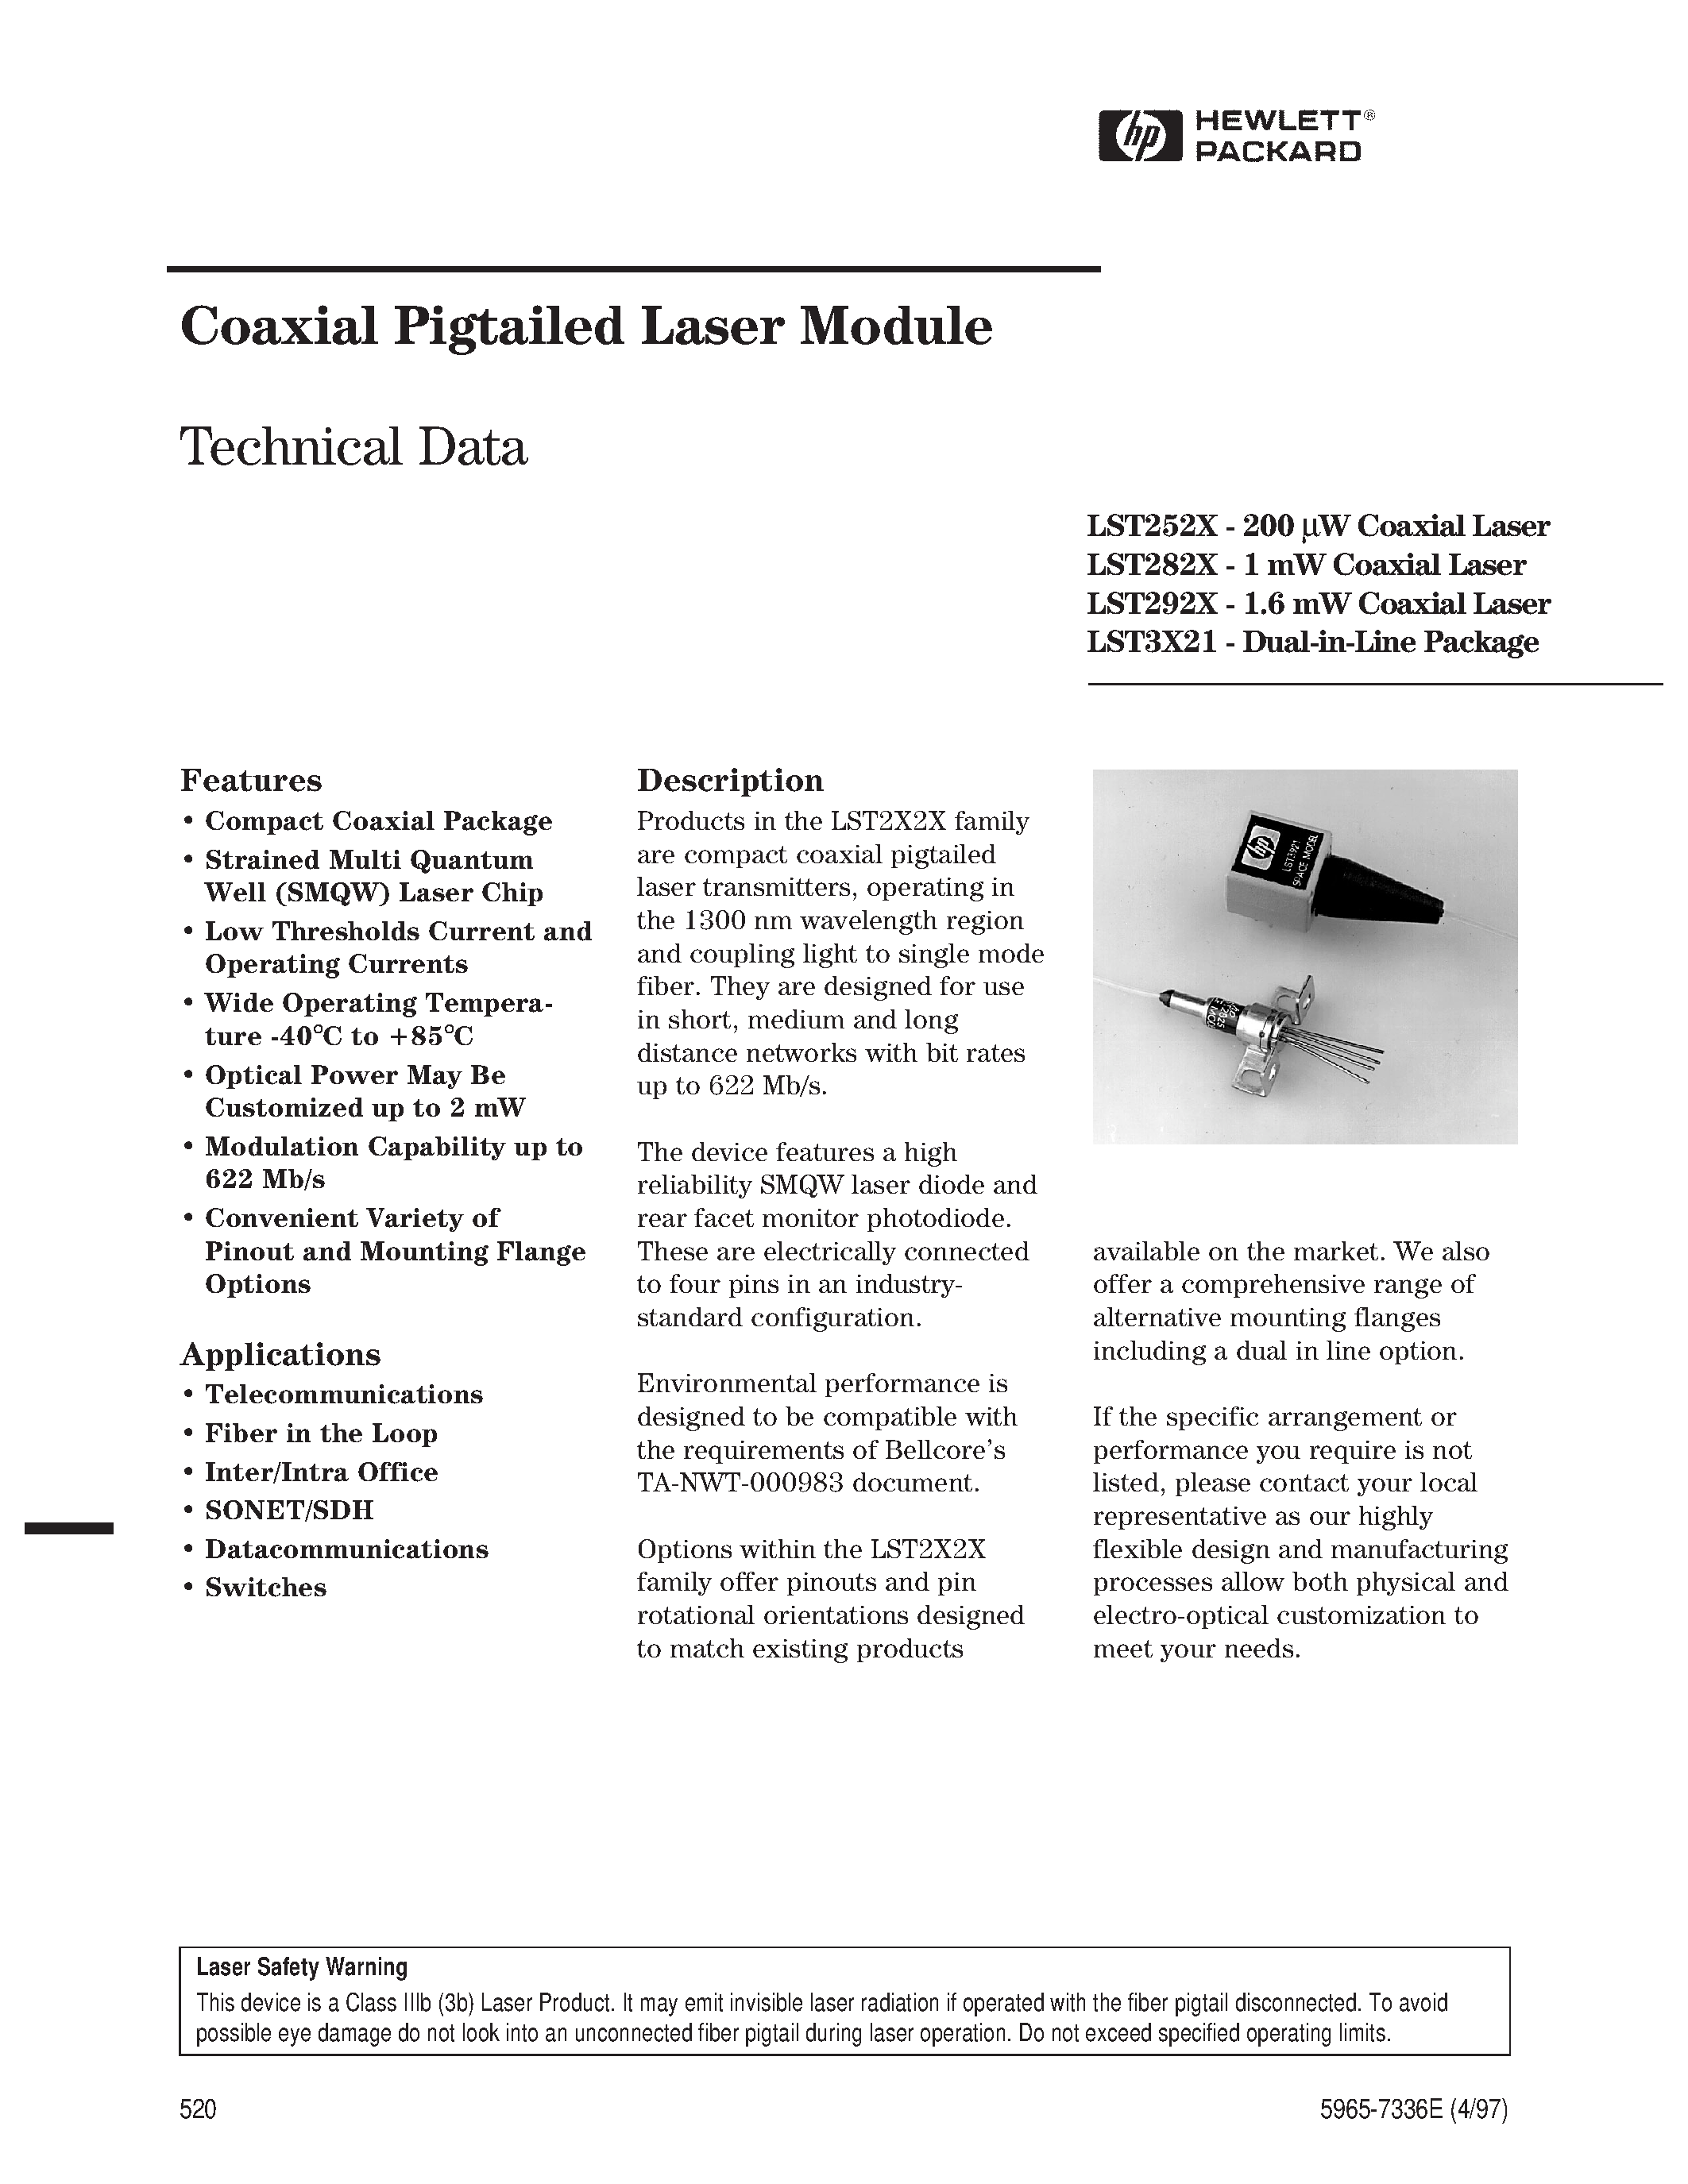 Datasheet LST2525-S4-B-FP - Coaxial Pigtailed Laser Module page 1